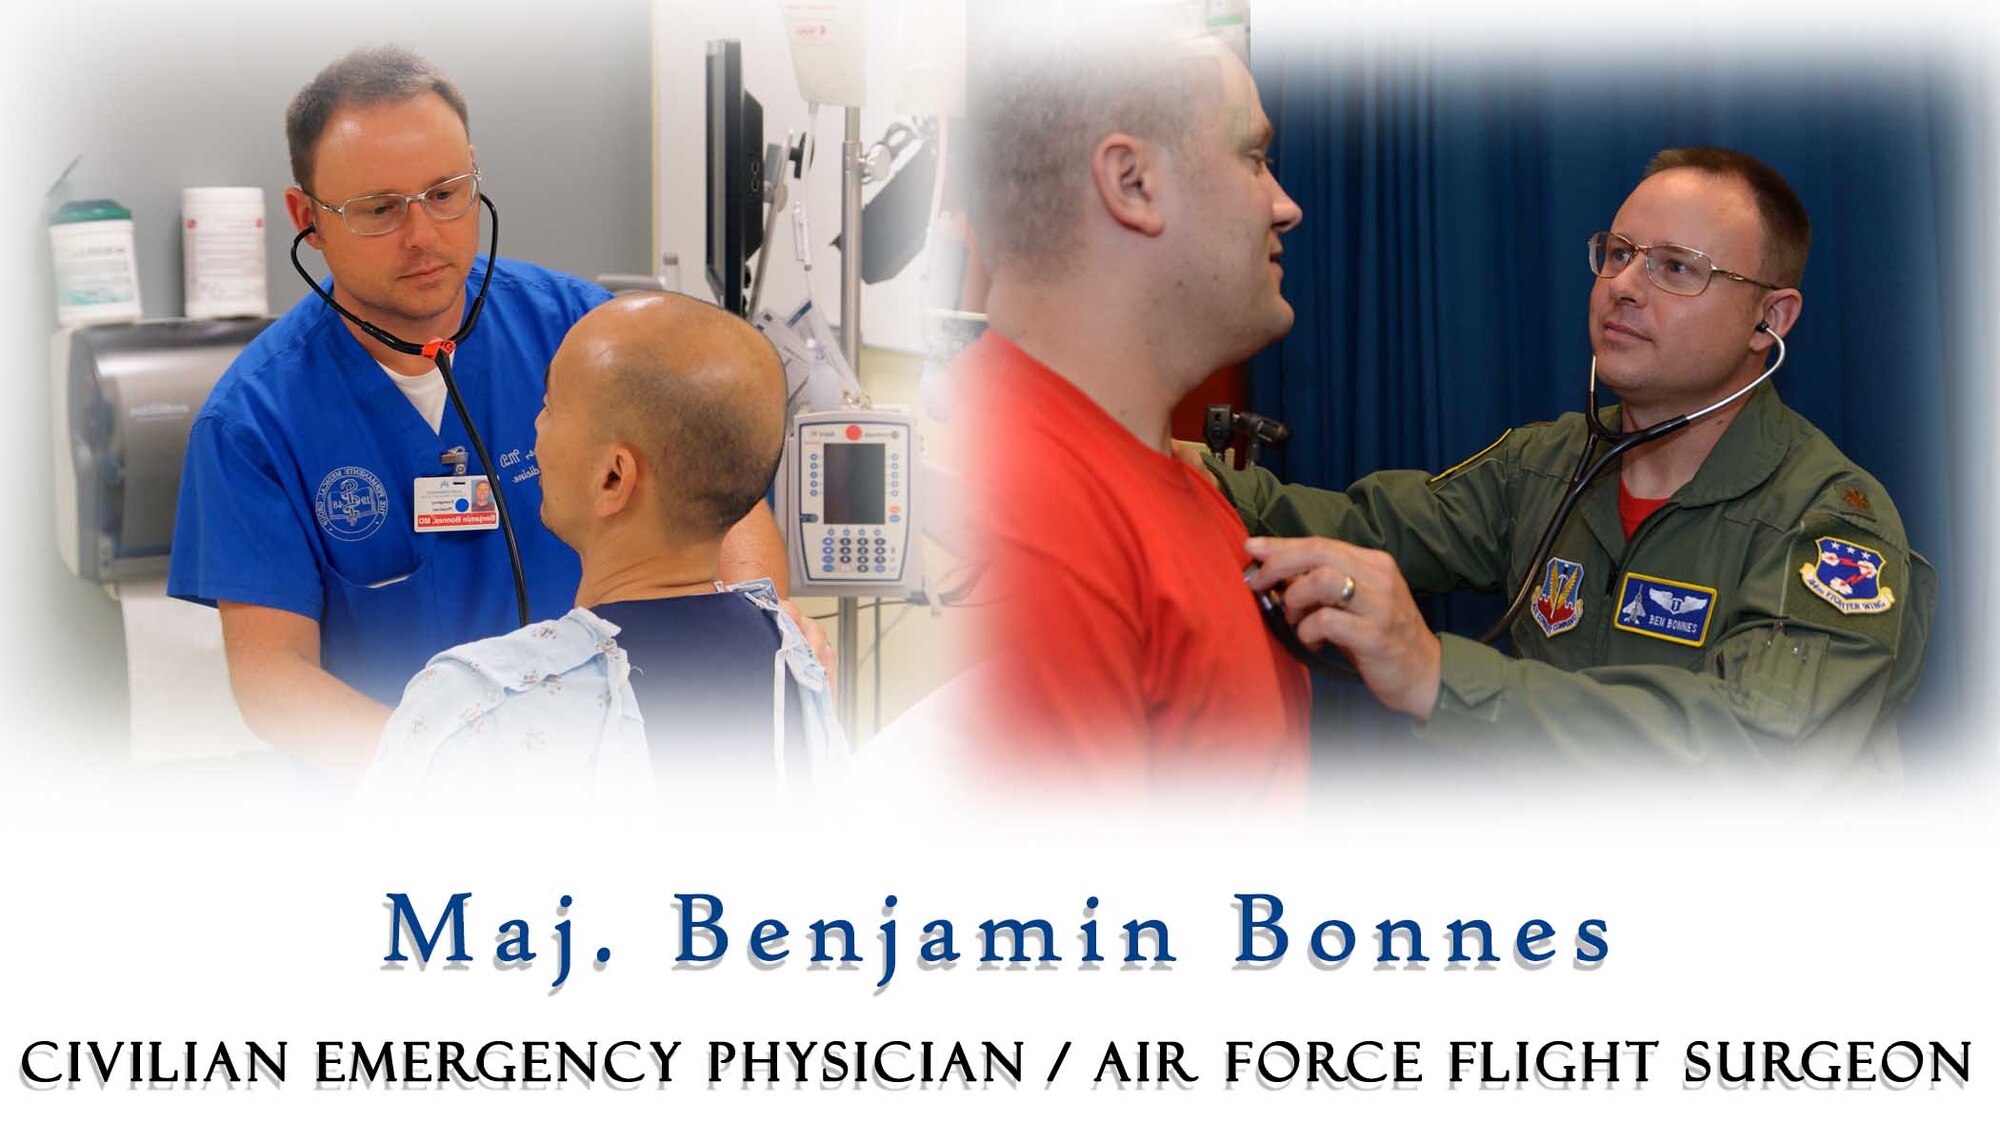 U.S. Air Force Maj. Benjamin Bonnes, 144th Medical Group flight surgeon, joined the Air National Guard after completing emergency medicine residency at Johns Hopkins, Md. Bonnes is a full-time civilian emergency physician in Oakland, Calif., and a part-time Air Force flight surgeon. He serves and trains at the Fresno Air National Guard Base one weekend every month on top of any additional training exercises scheduled throughout the year. (U.S. Air National Guard illustration by Senior Airman Klynne Pearl Serrano)